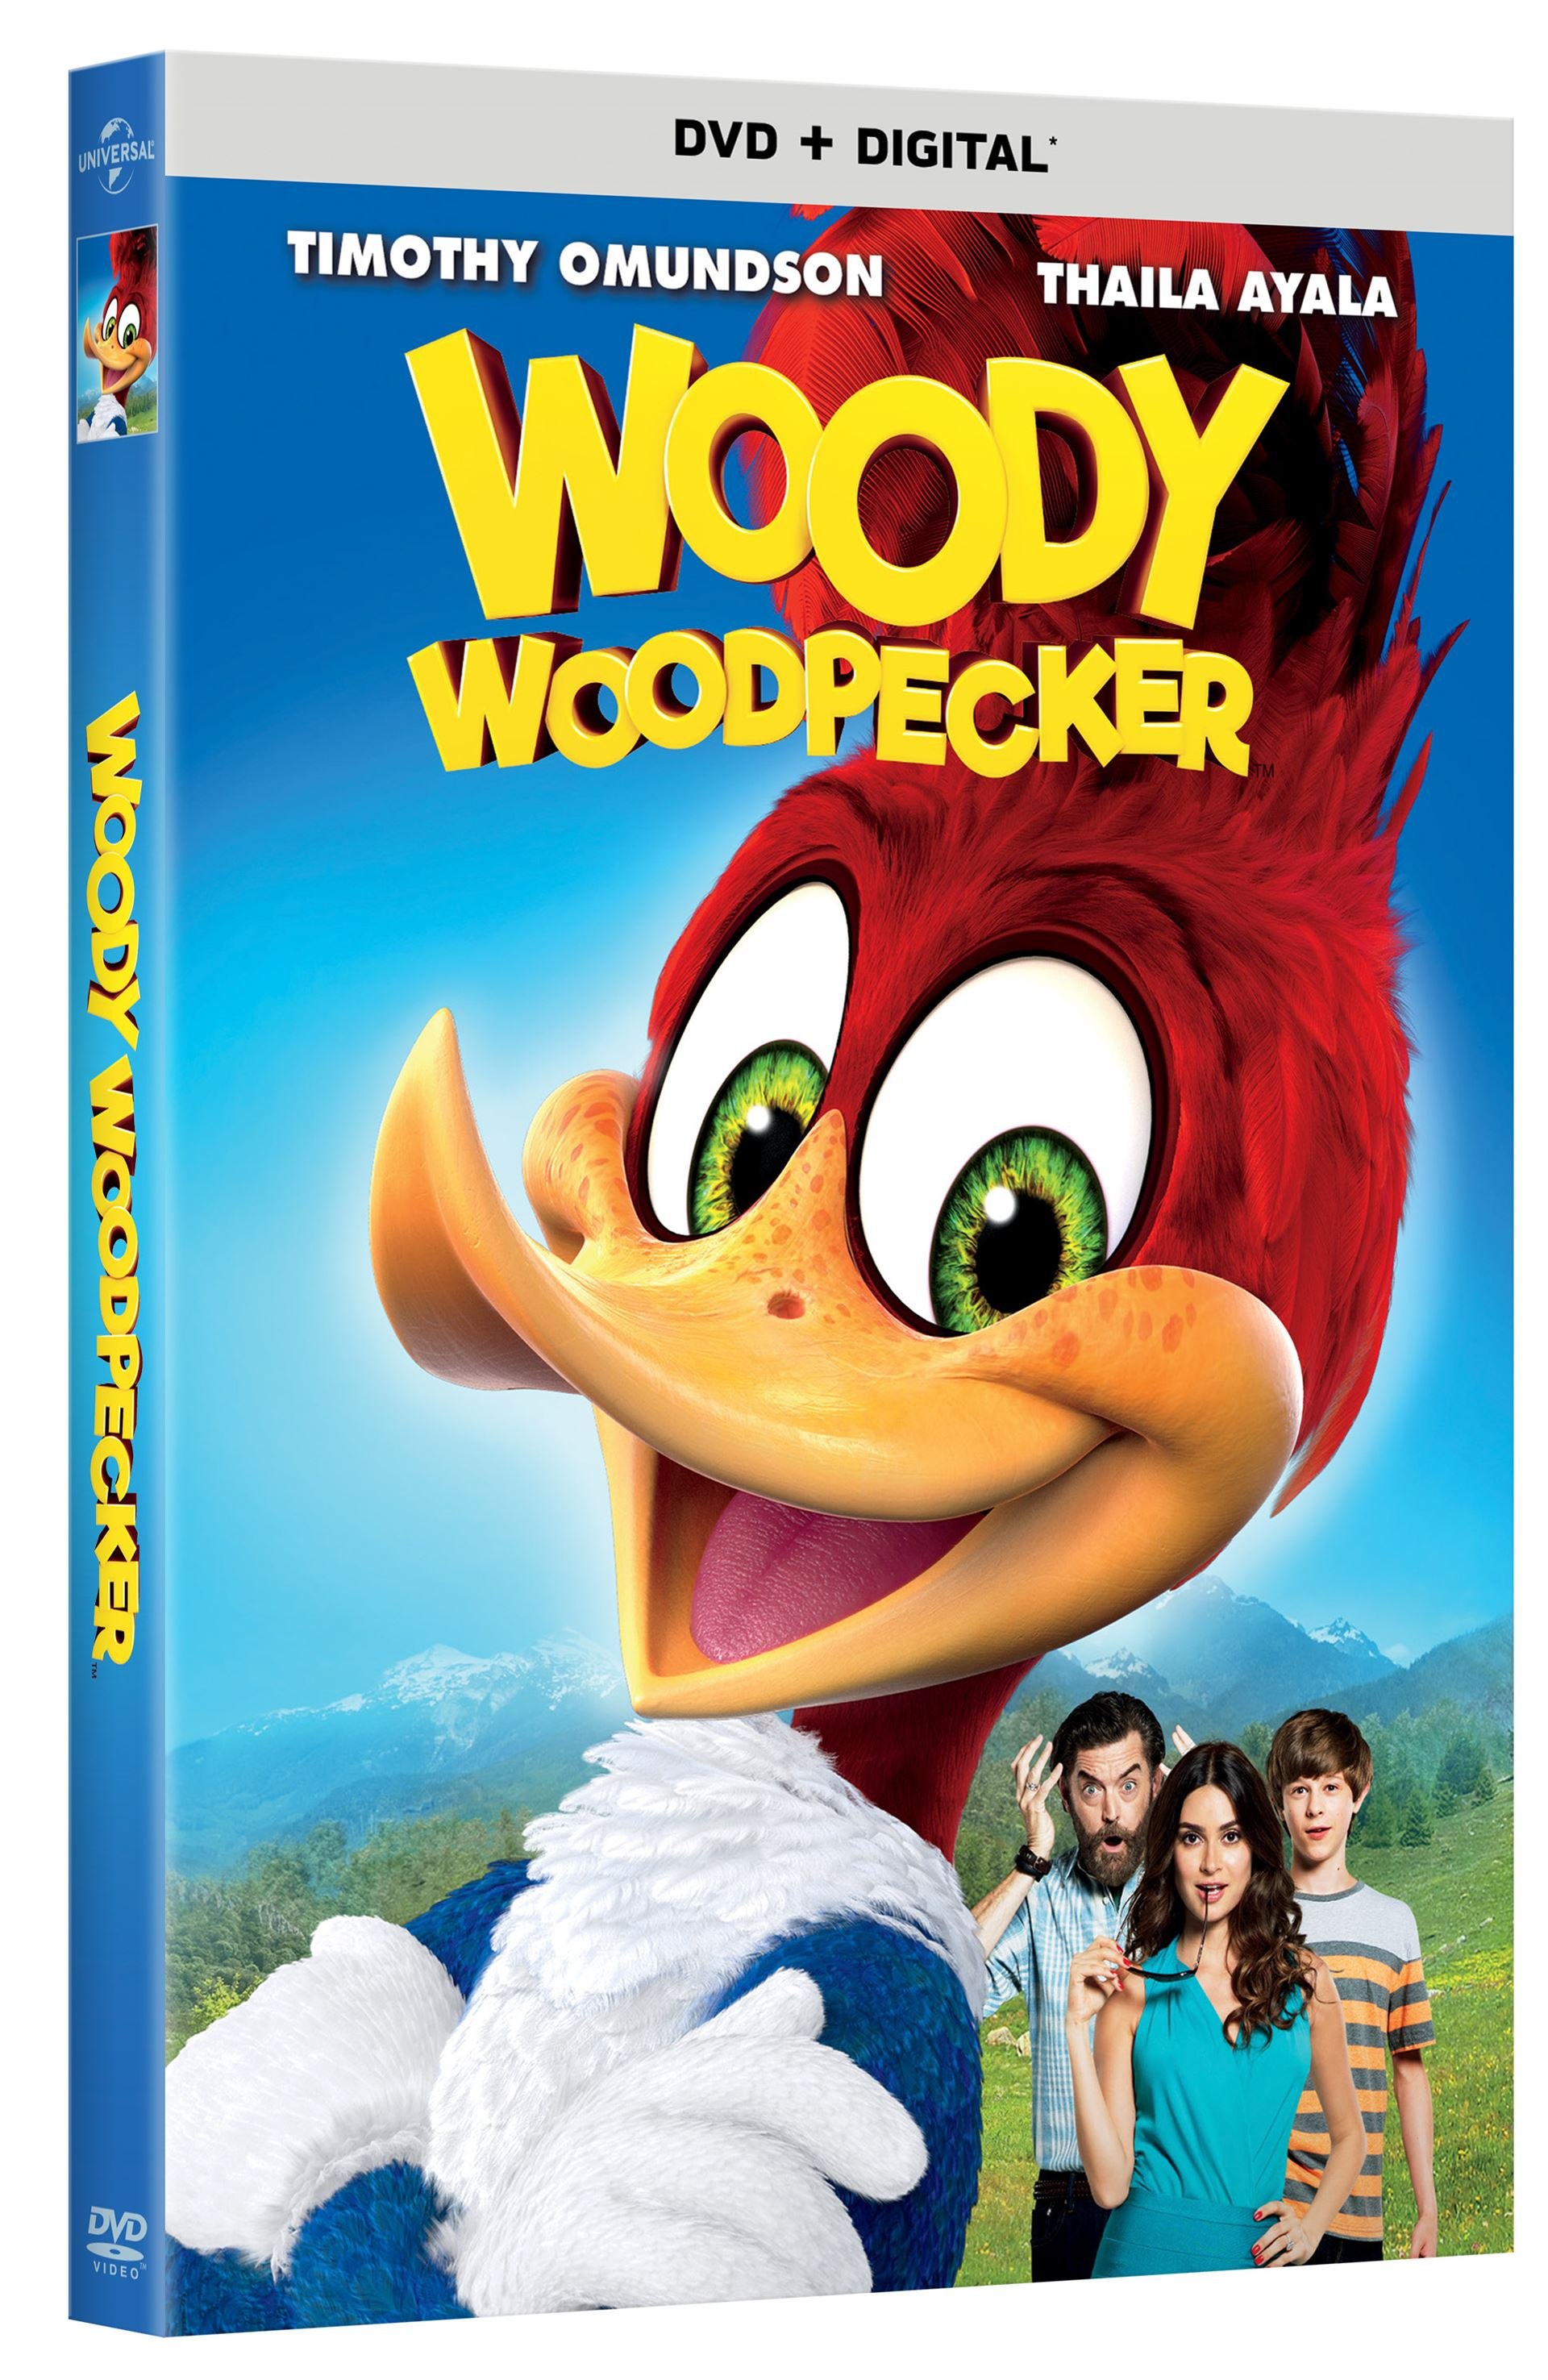 WATCH: Chaos Ensues in New Clip from 'Woody Woodpecker